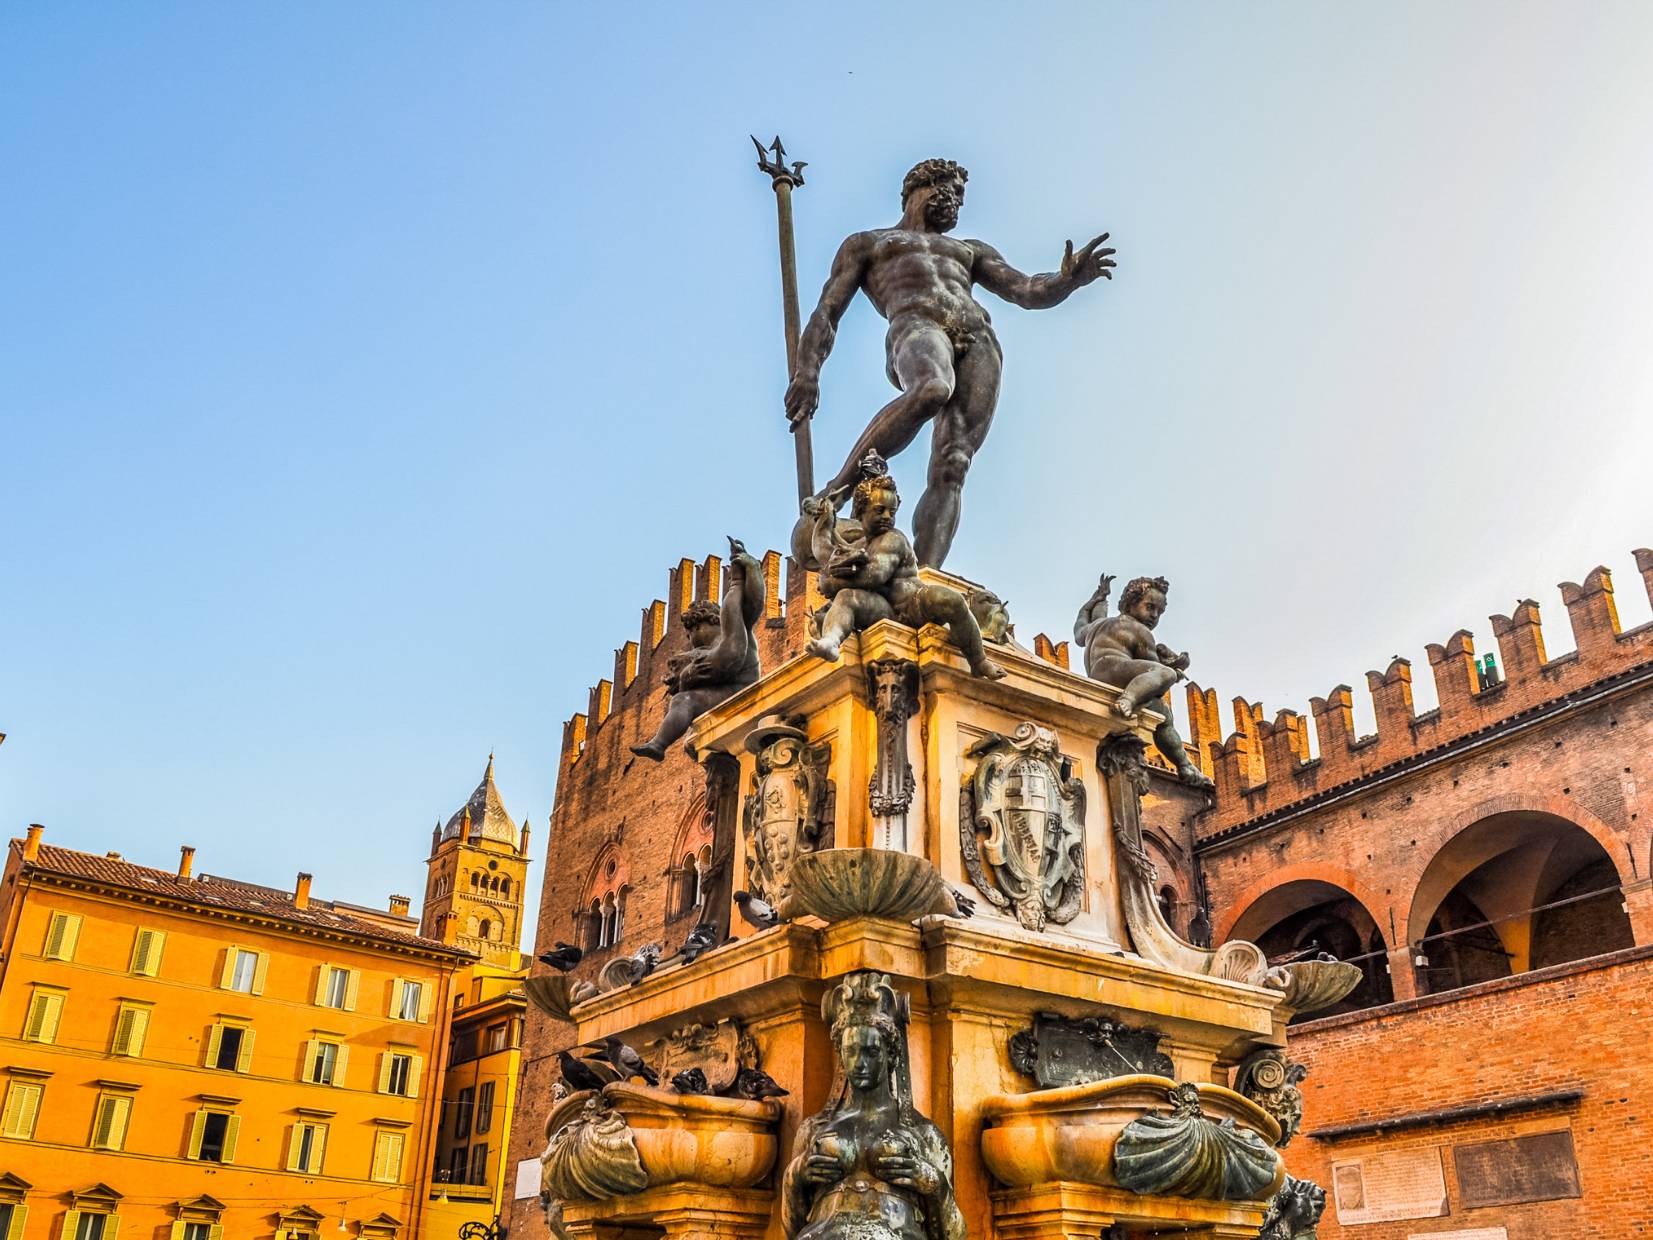 An image showing the main fountain of Bologna